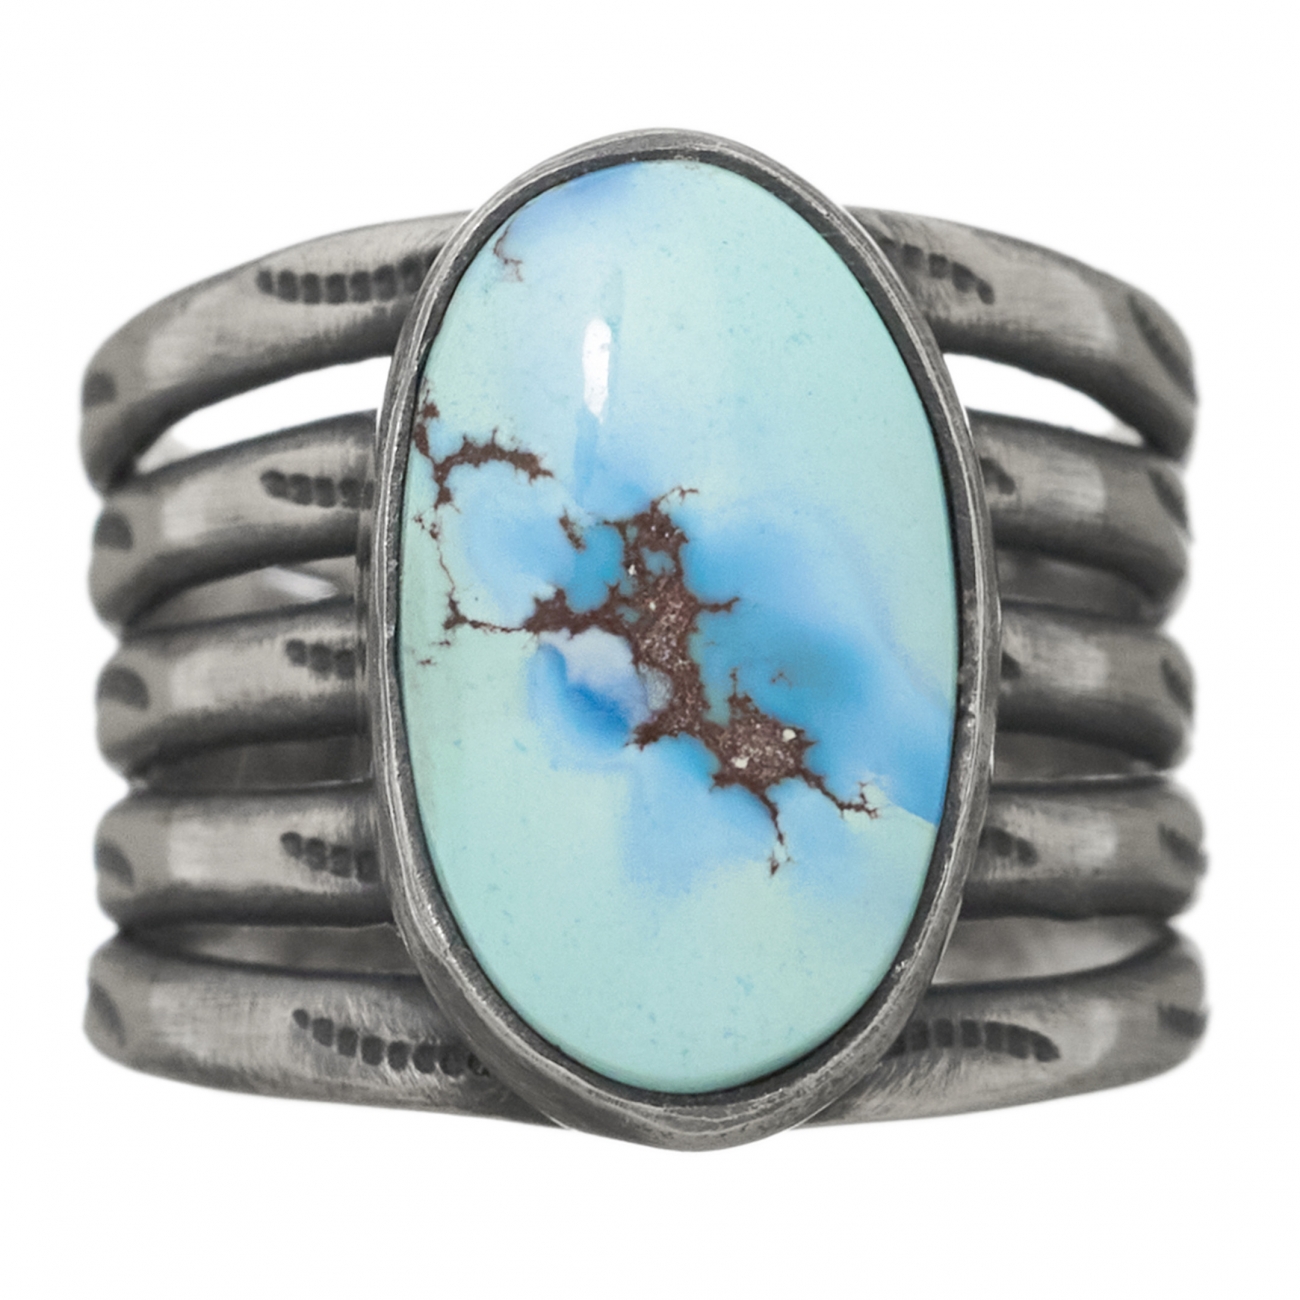 Navajo ring for women BA1120 in turquoise and silver - Harpo Paris